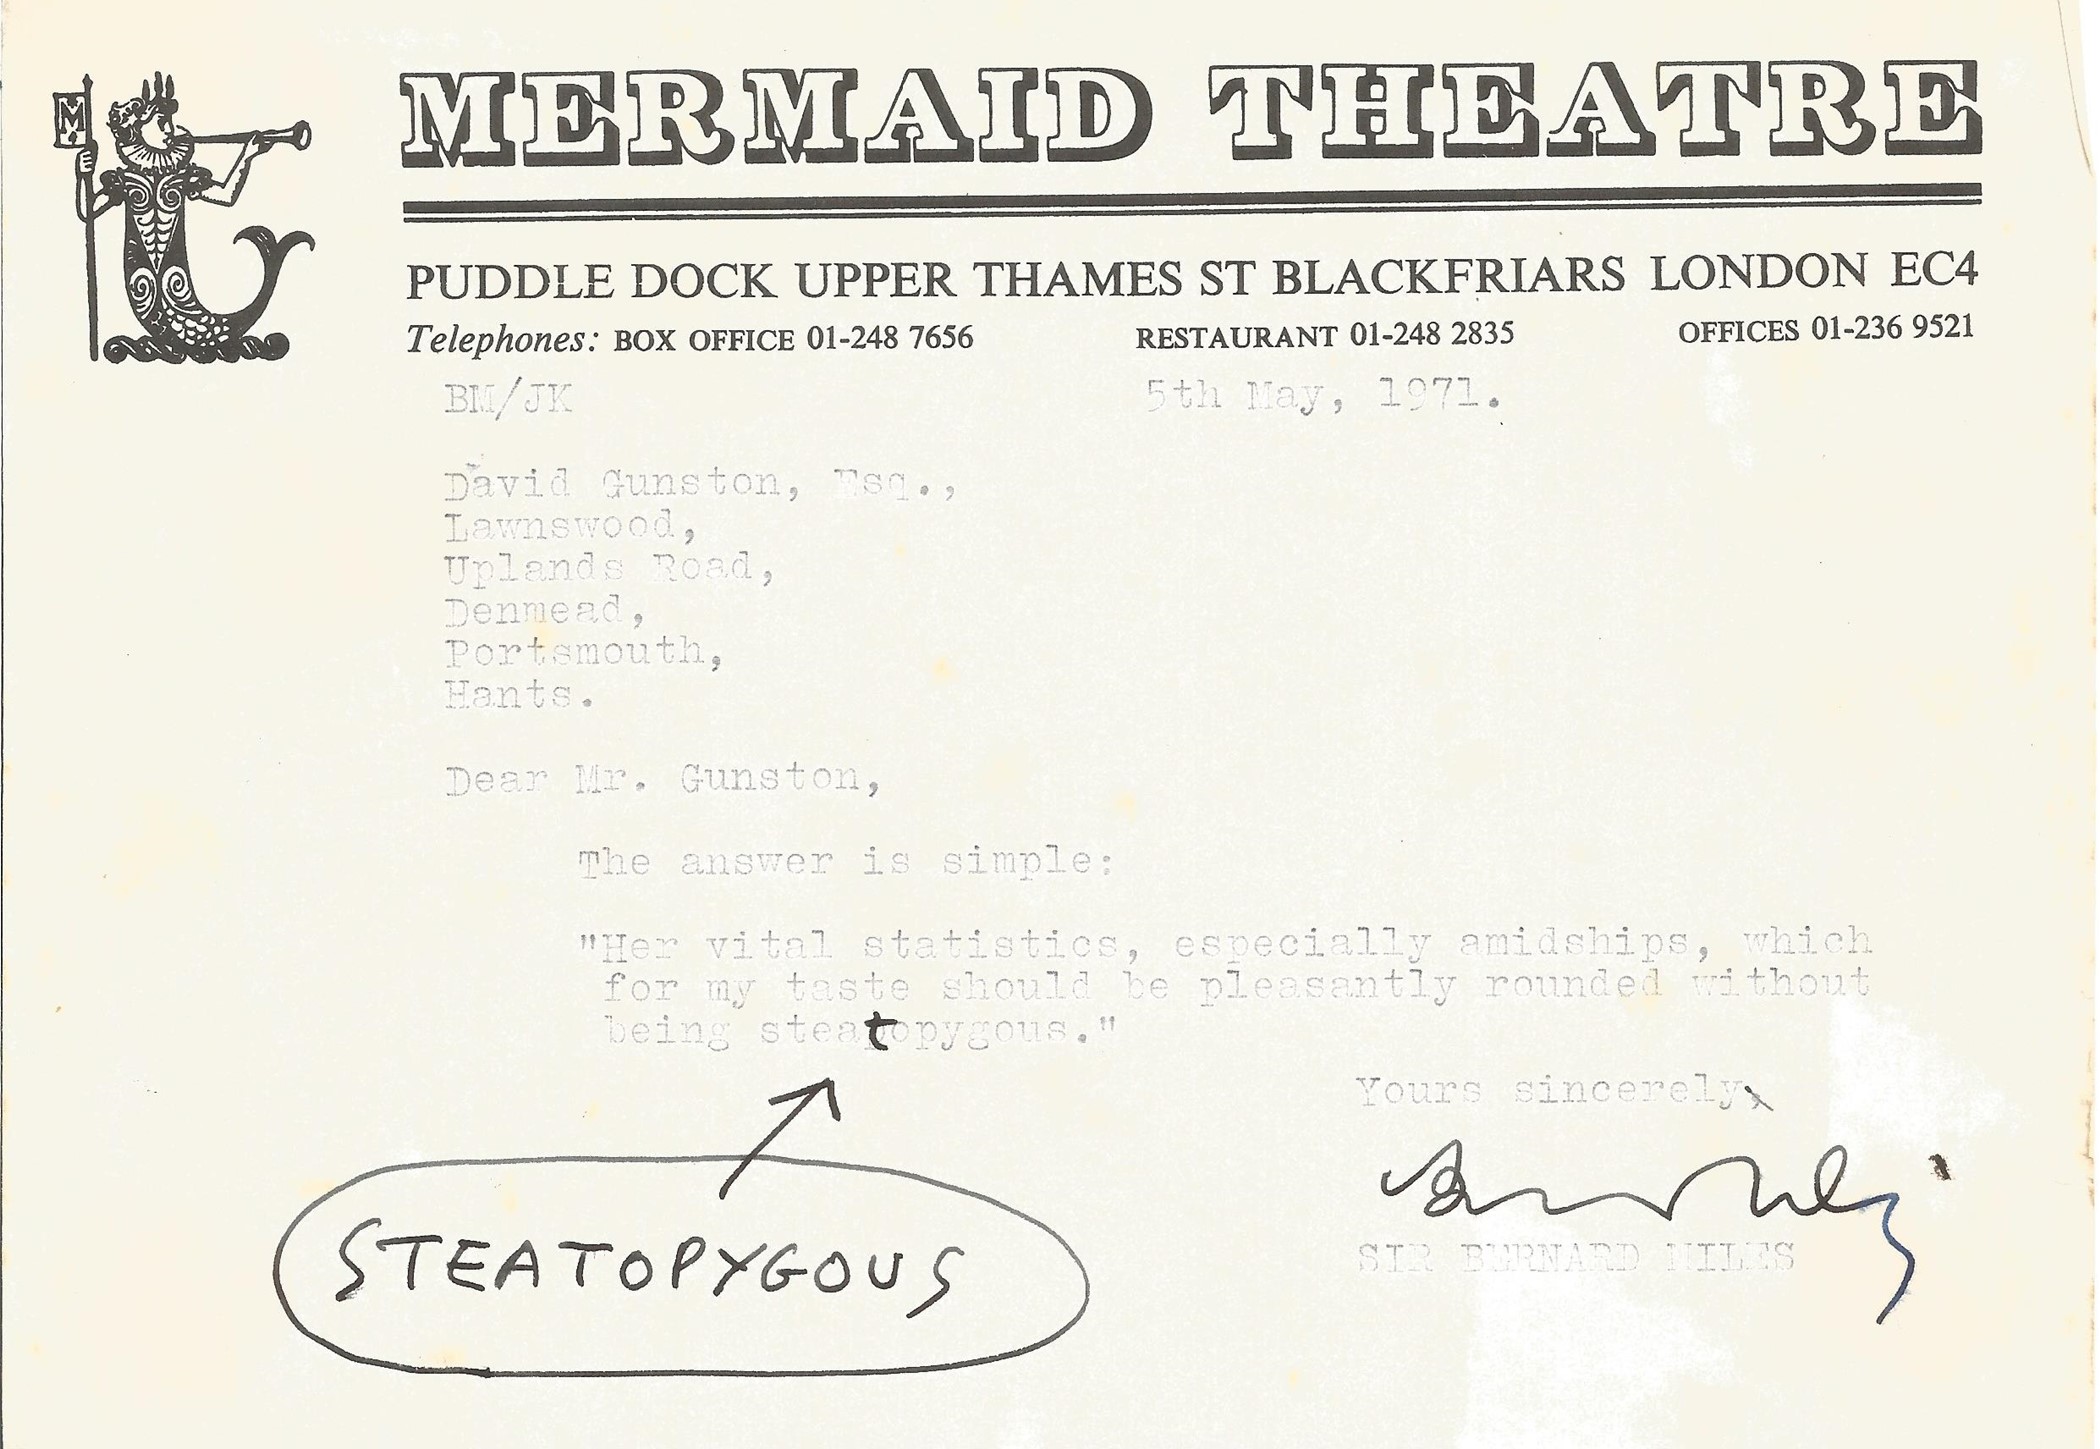 Actor Bernard Miles signed headed paper of the Mermaid Theatre London which he founded with a